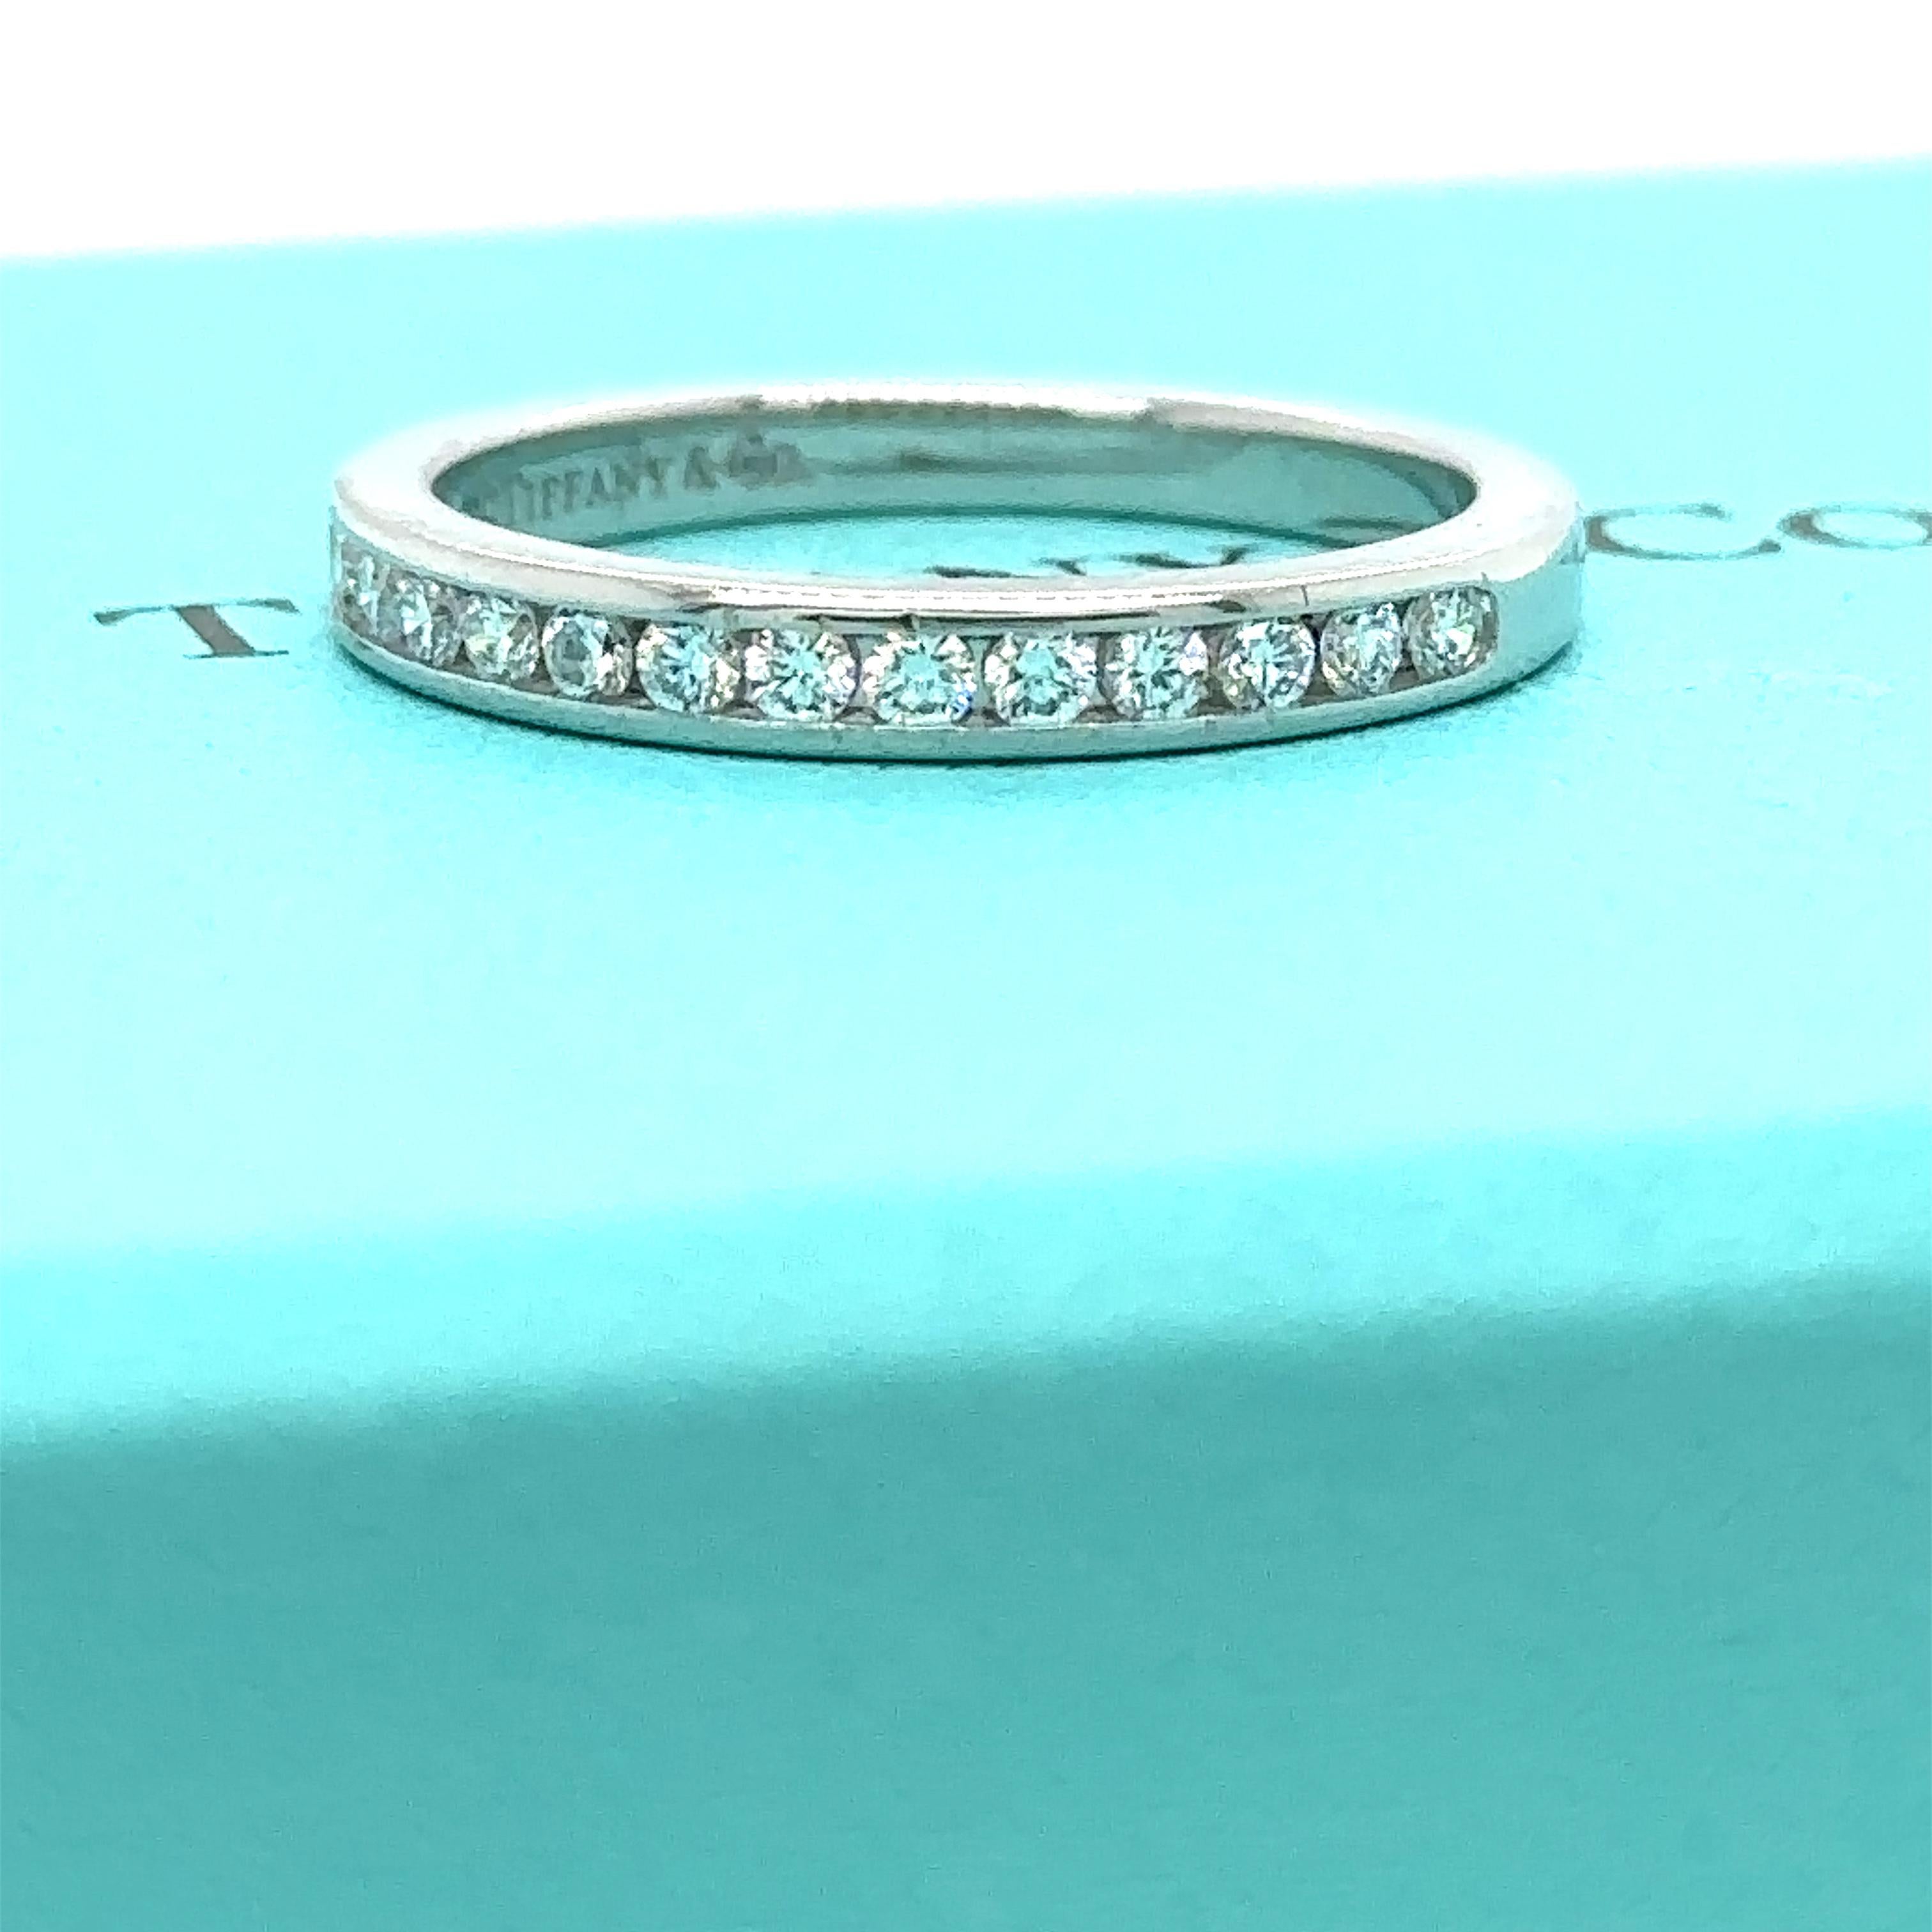 Unique features:

Tiffany & Co setting wedding band in platinum with a half circle of diamonds 2.5mm
Metal: 950 Platinum
Carat: 0.24ct
Colour: N/A
Clarity: N/A
Cut: Round Brilliant
Weight: 3.6 grams
Engravings/Markings: PT950 TIFFANY &